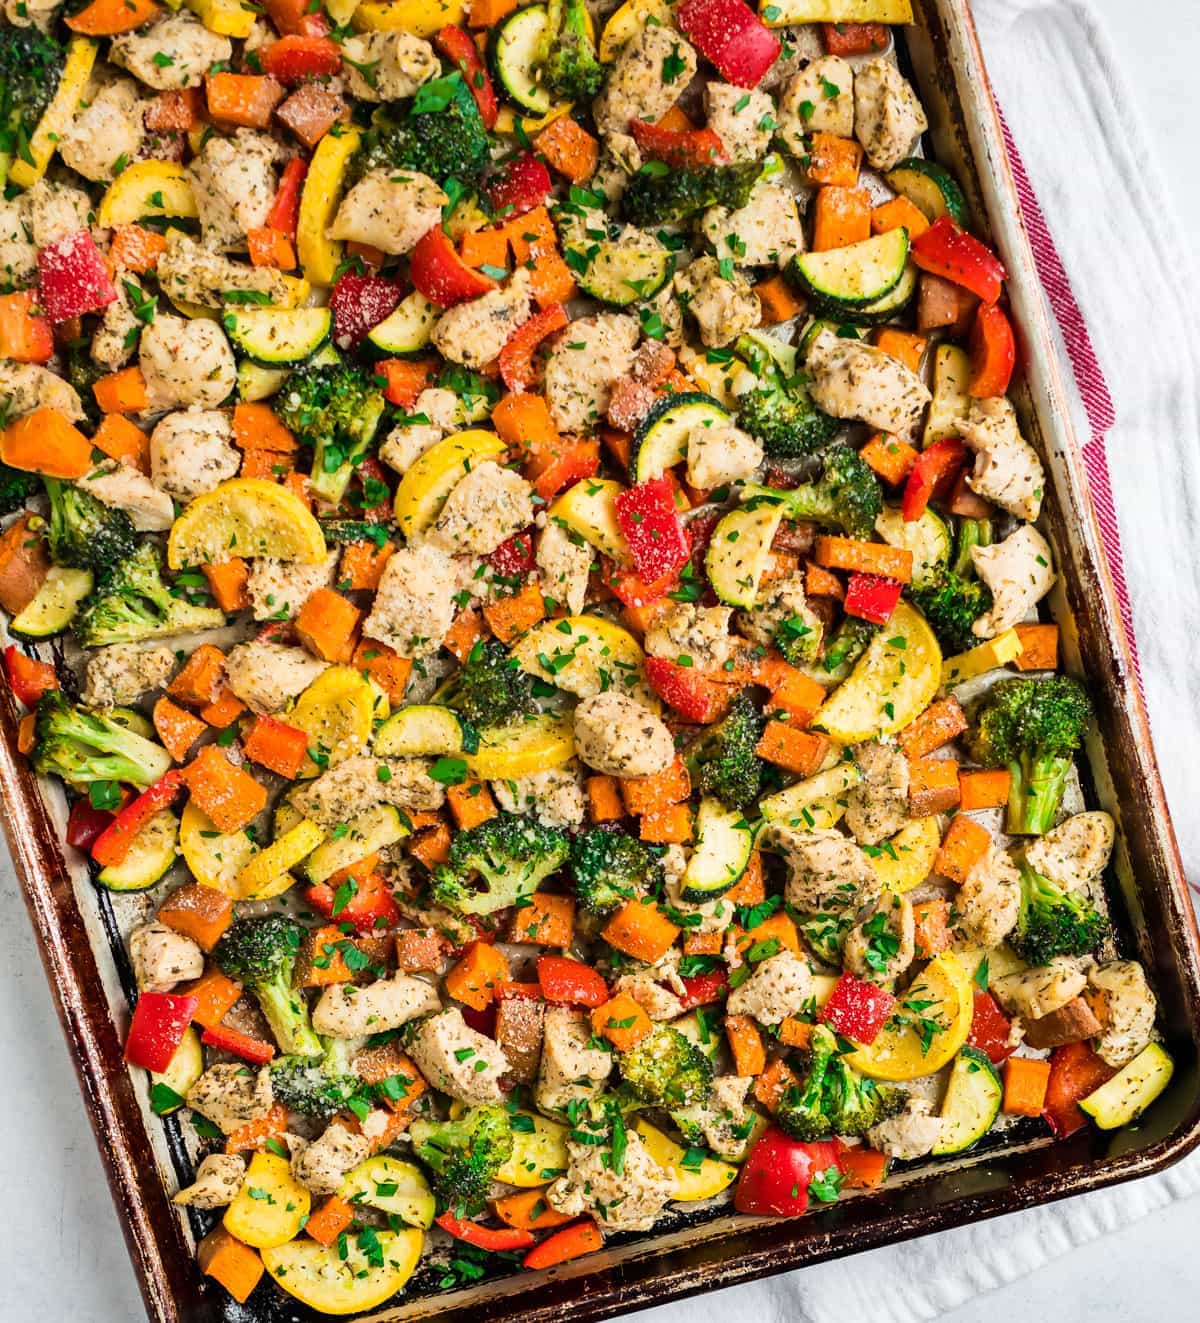 Oven roasted sheet pan chicken and vegetables